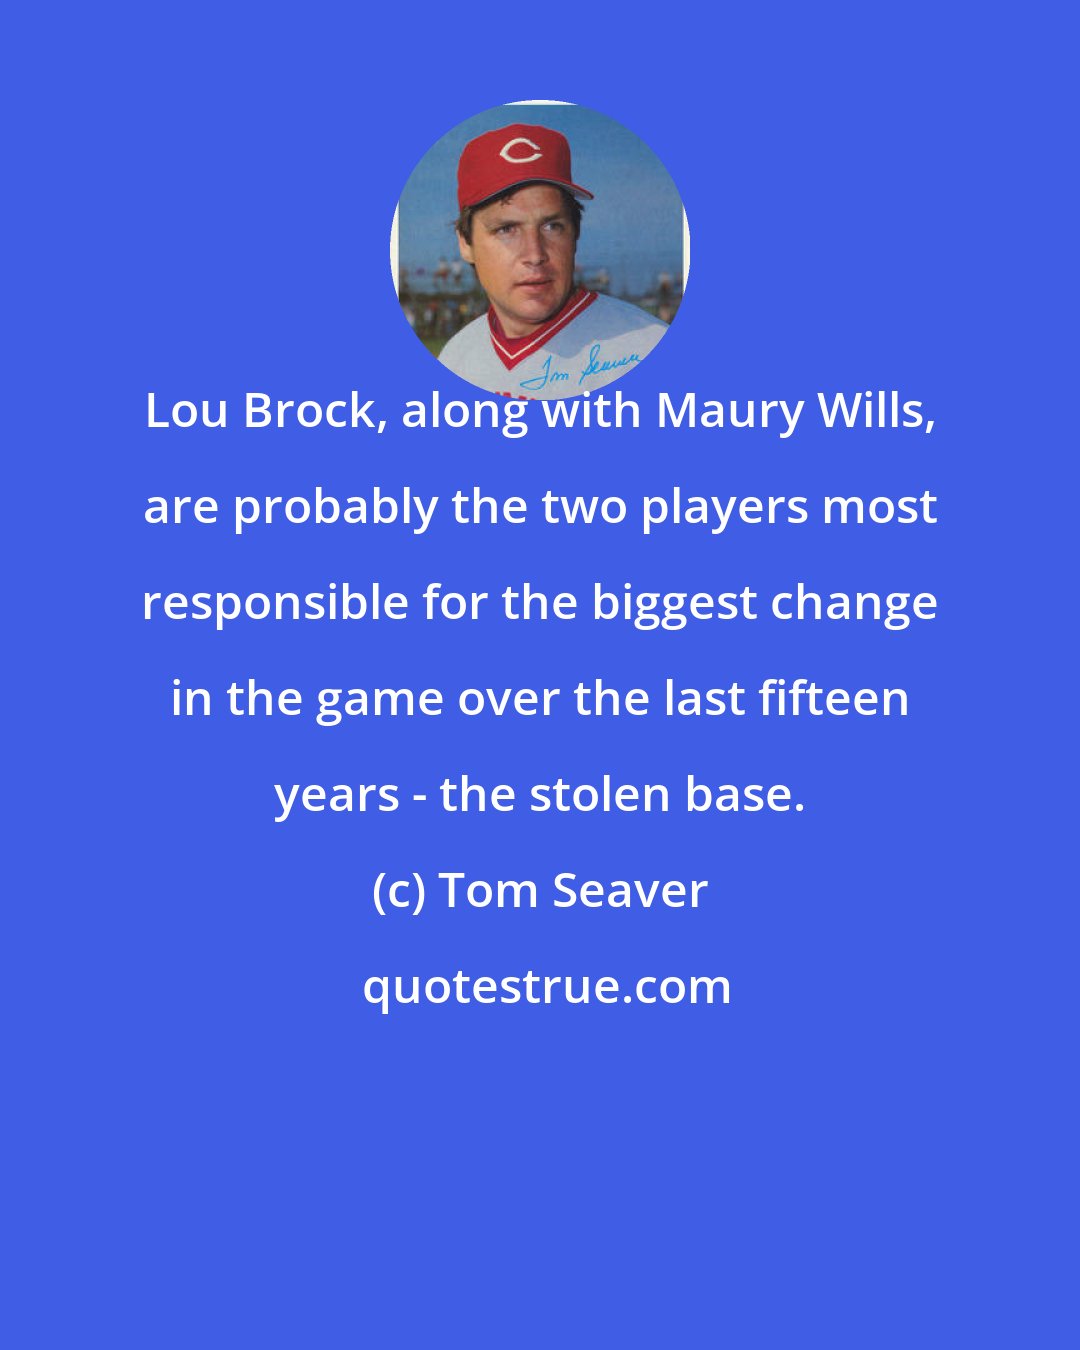 Tom Seaver: Lou Brock, along with Maury Wills, are probably the two players most responsible for the biggest change in the game over the last fifteen years - the stolen base.